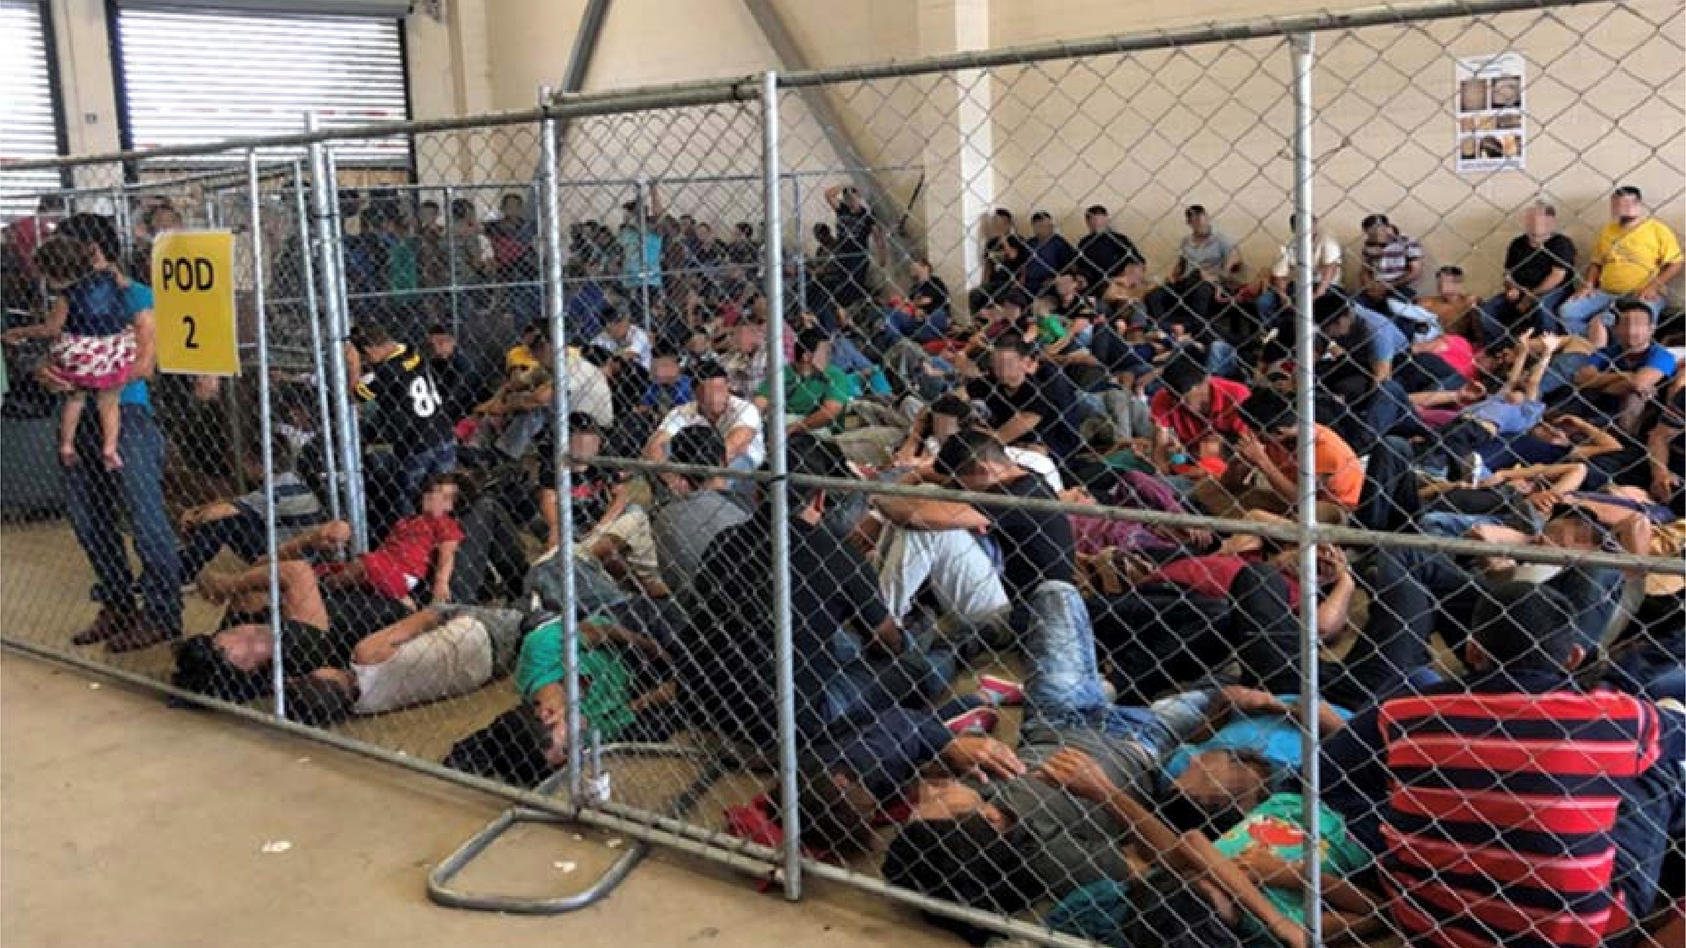 An overcrowded fenced area holding families at a Border Patrol station is seen in a still image from video in McAllen, Texas, U.S. on June 10, 2019 and released as part of a report by the Department of Homeland Security's Office of Inspector General 